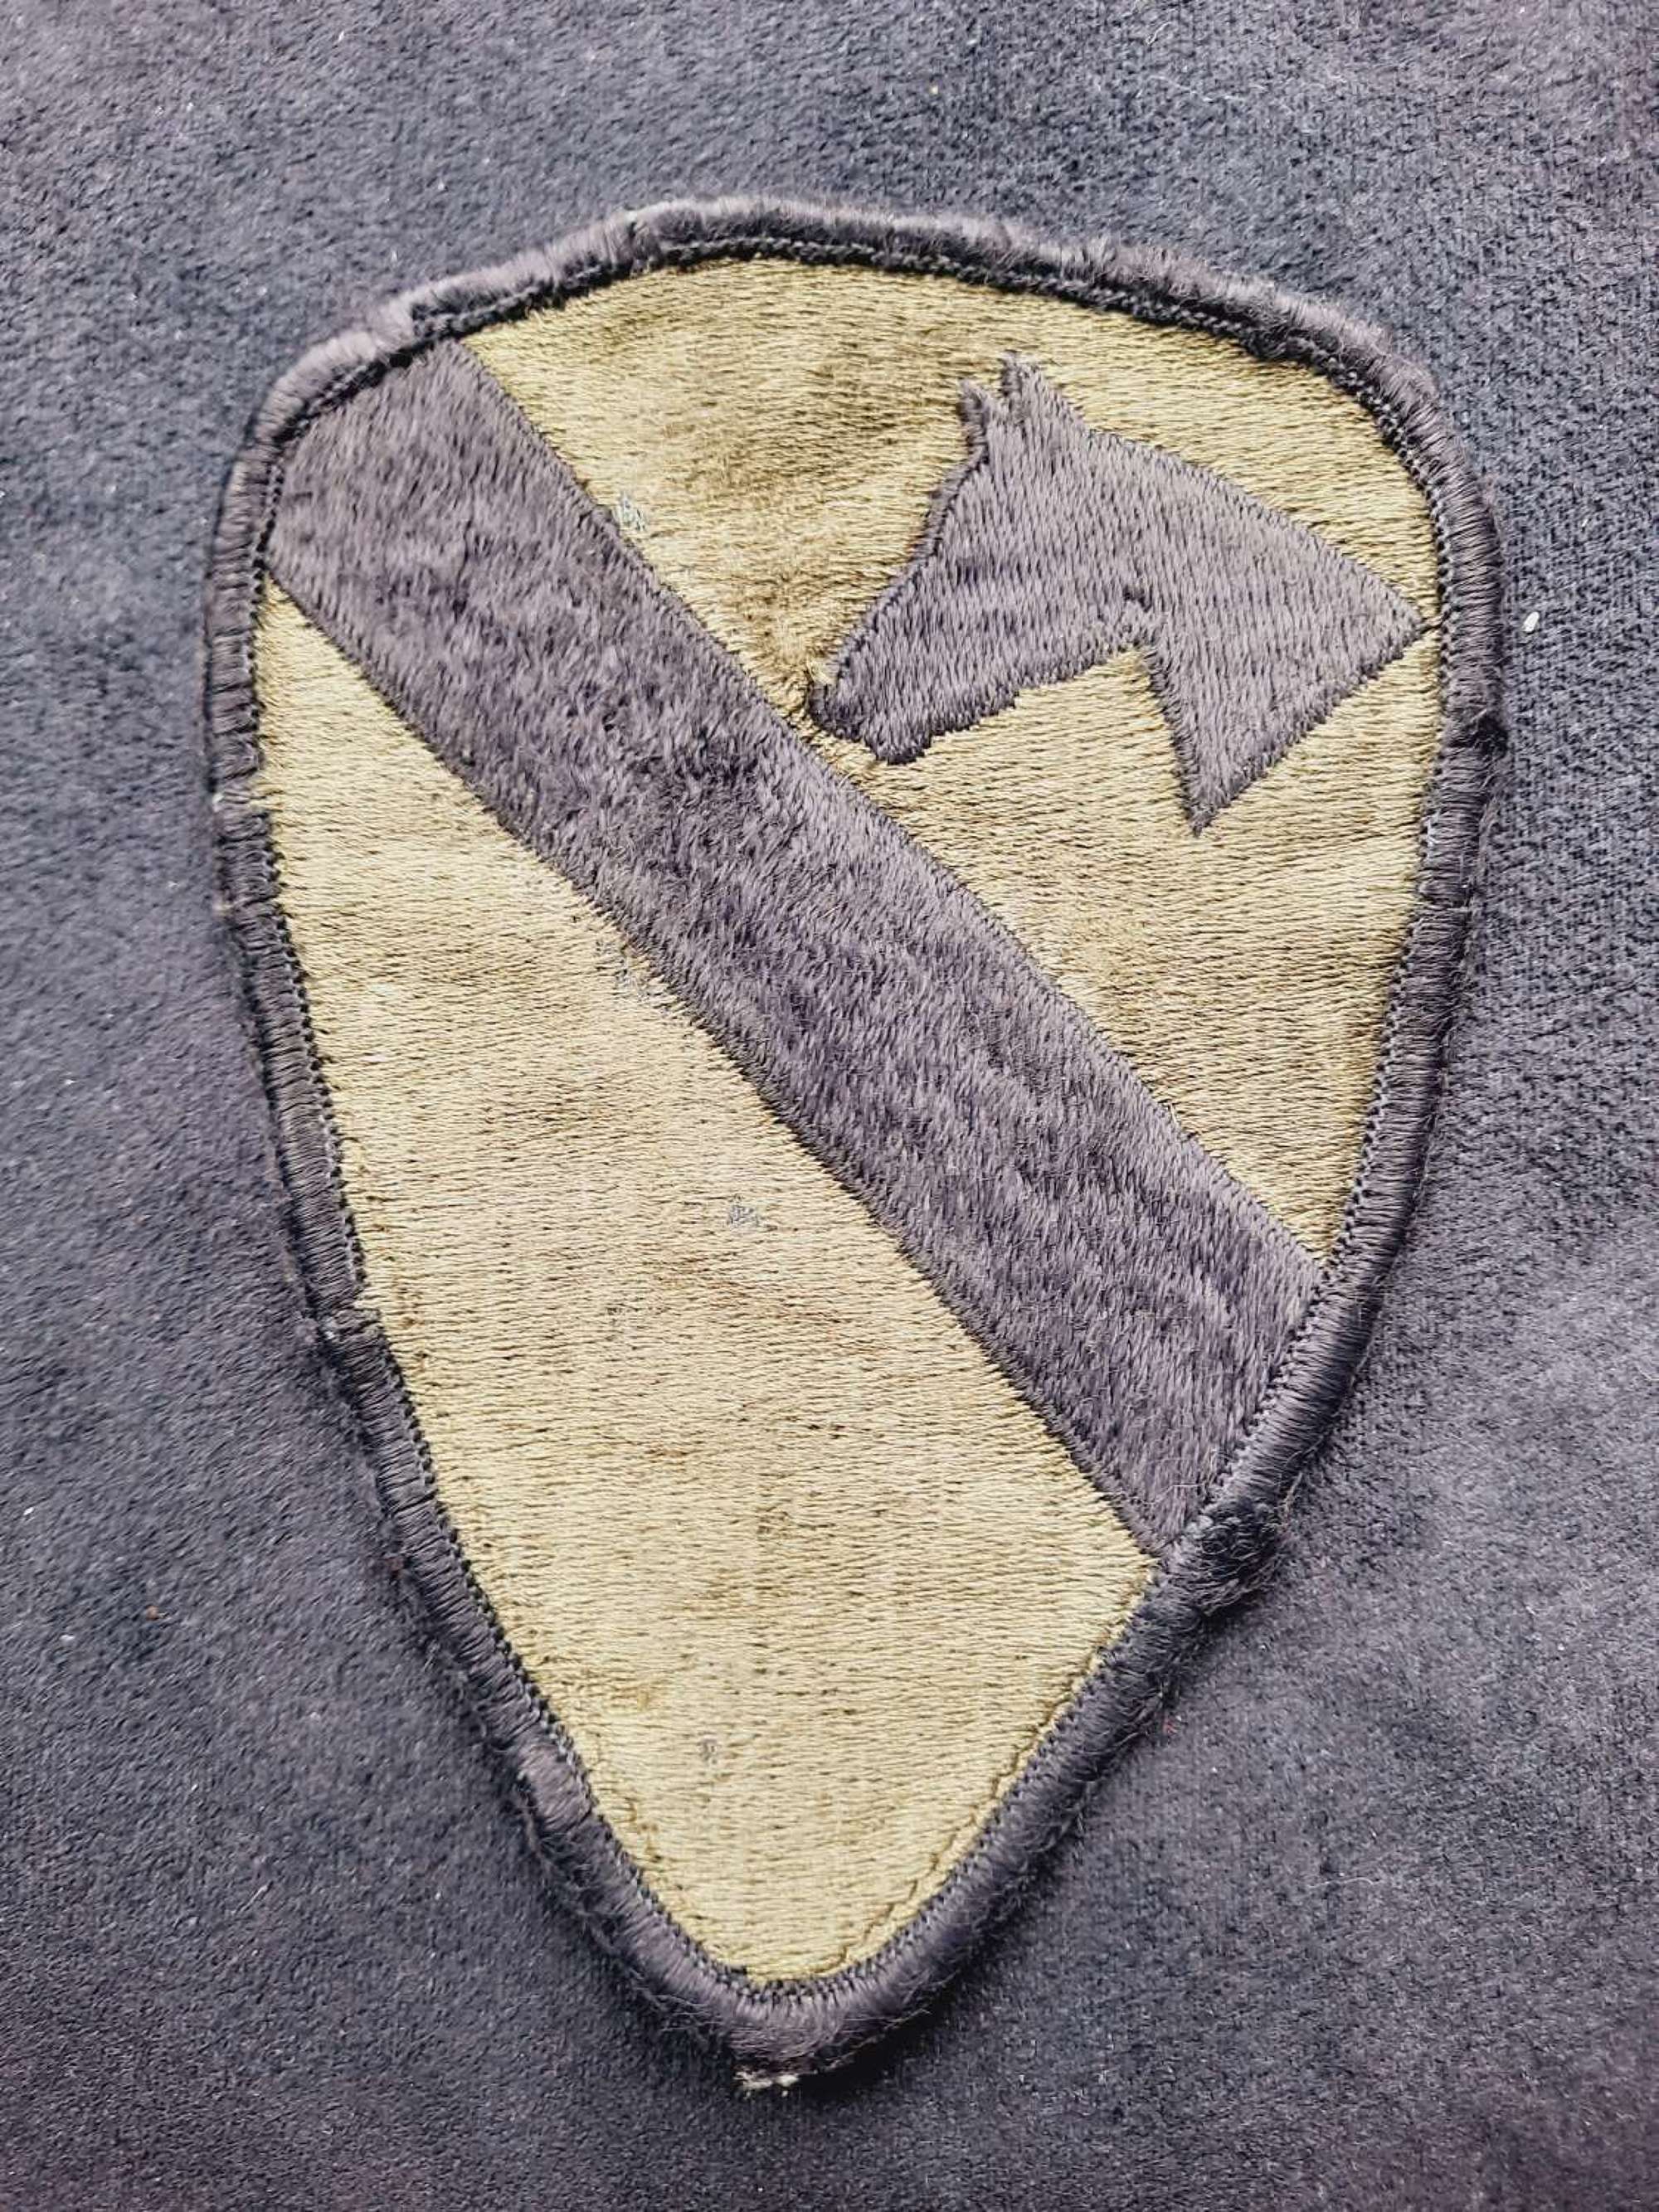 US 1st Cavalry Division Patch